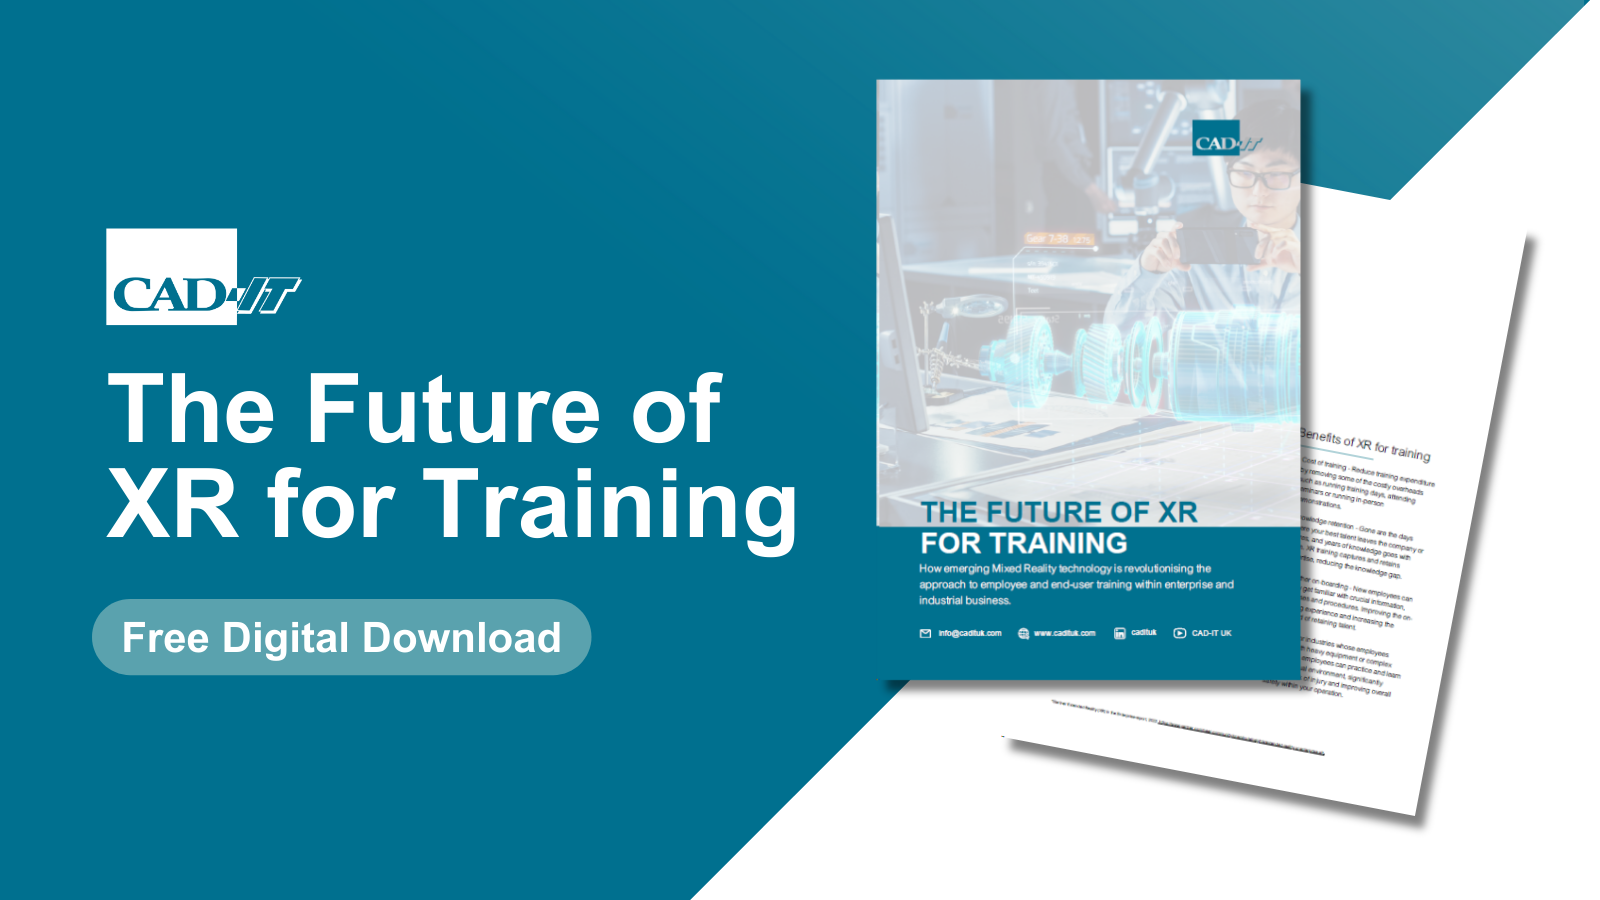 XR for Training Guide Download